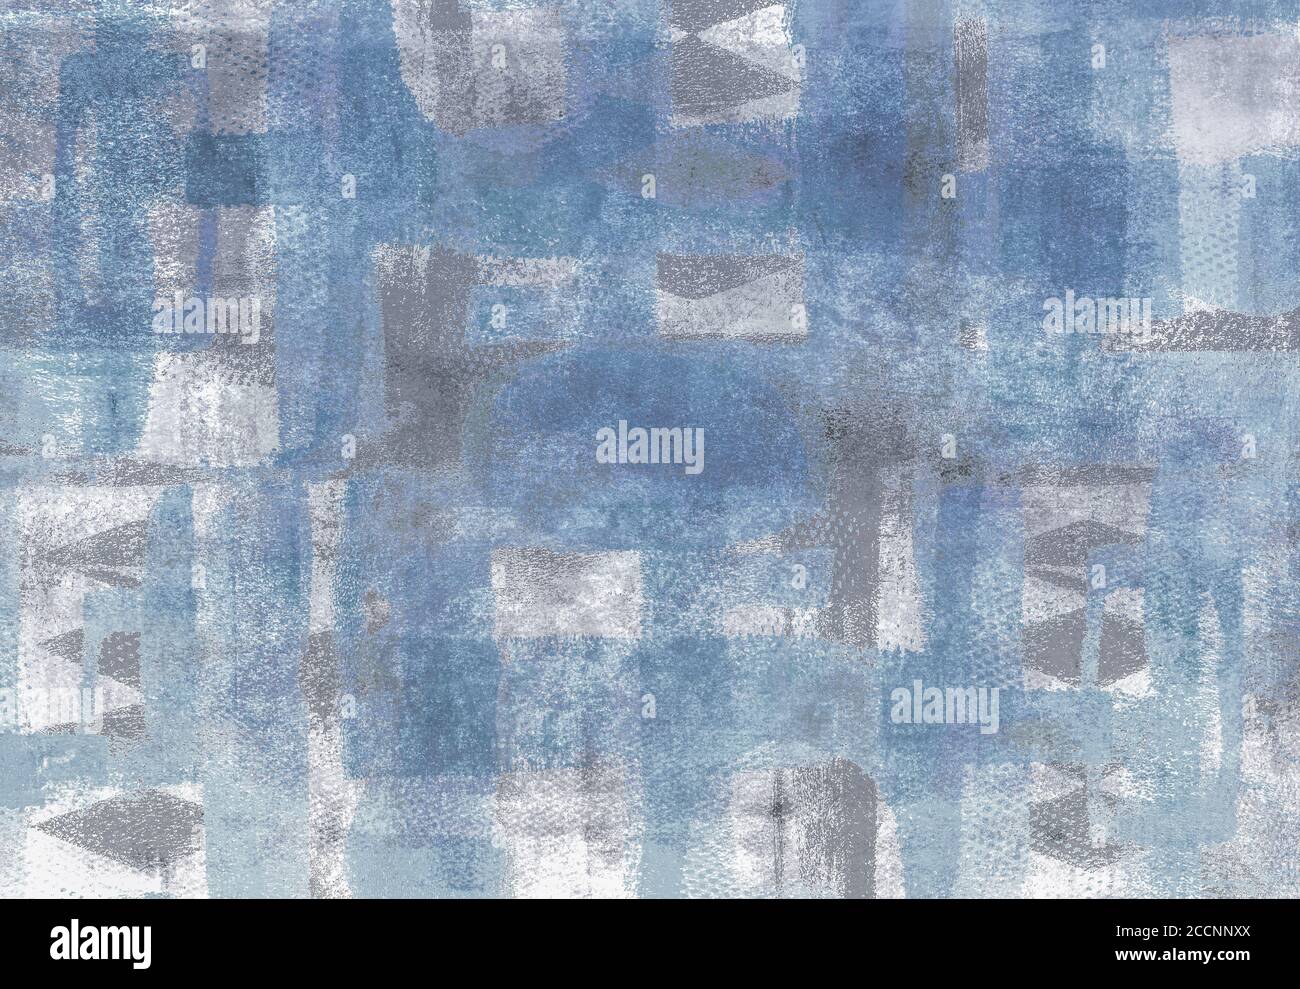 Mixed media creative background made of textured geometric shapes in blue-grey tones Stock Photo